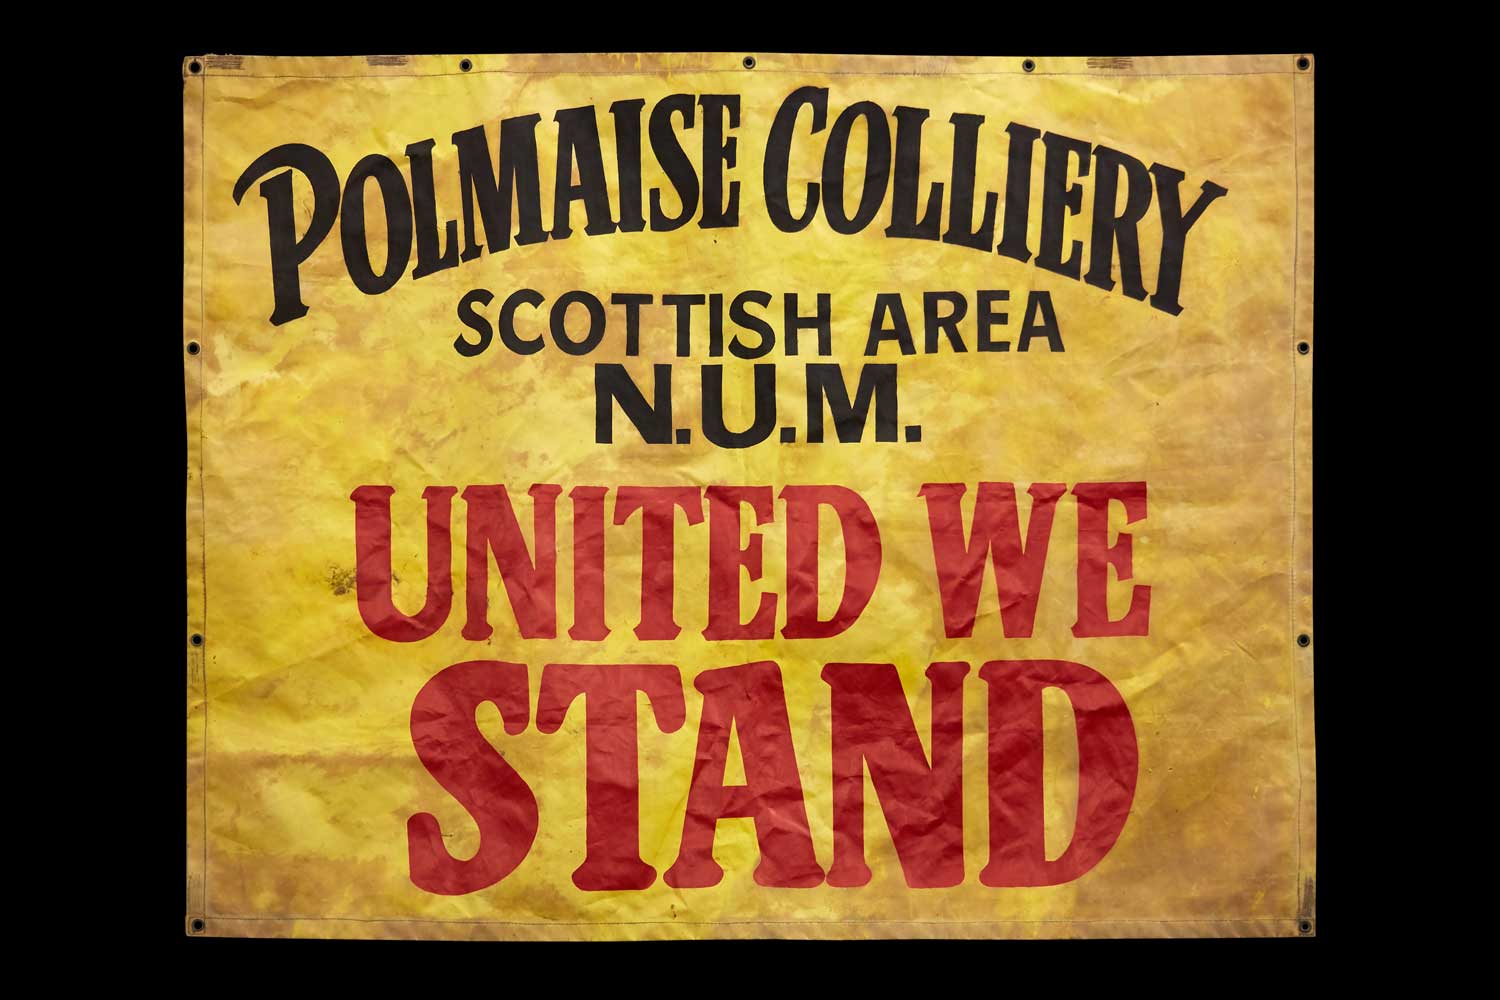 Polmaise Colliery - united we stand banner